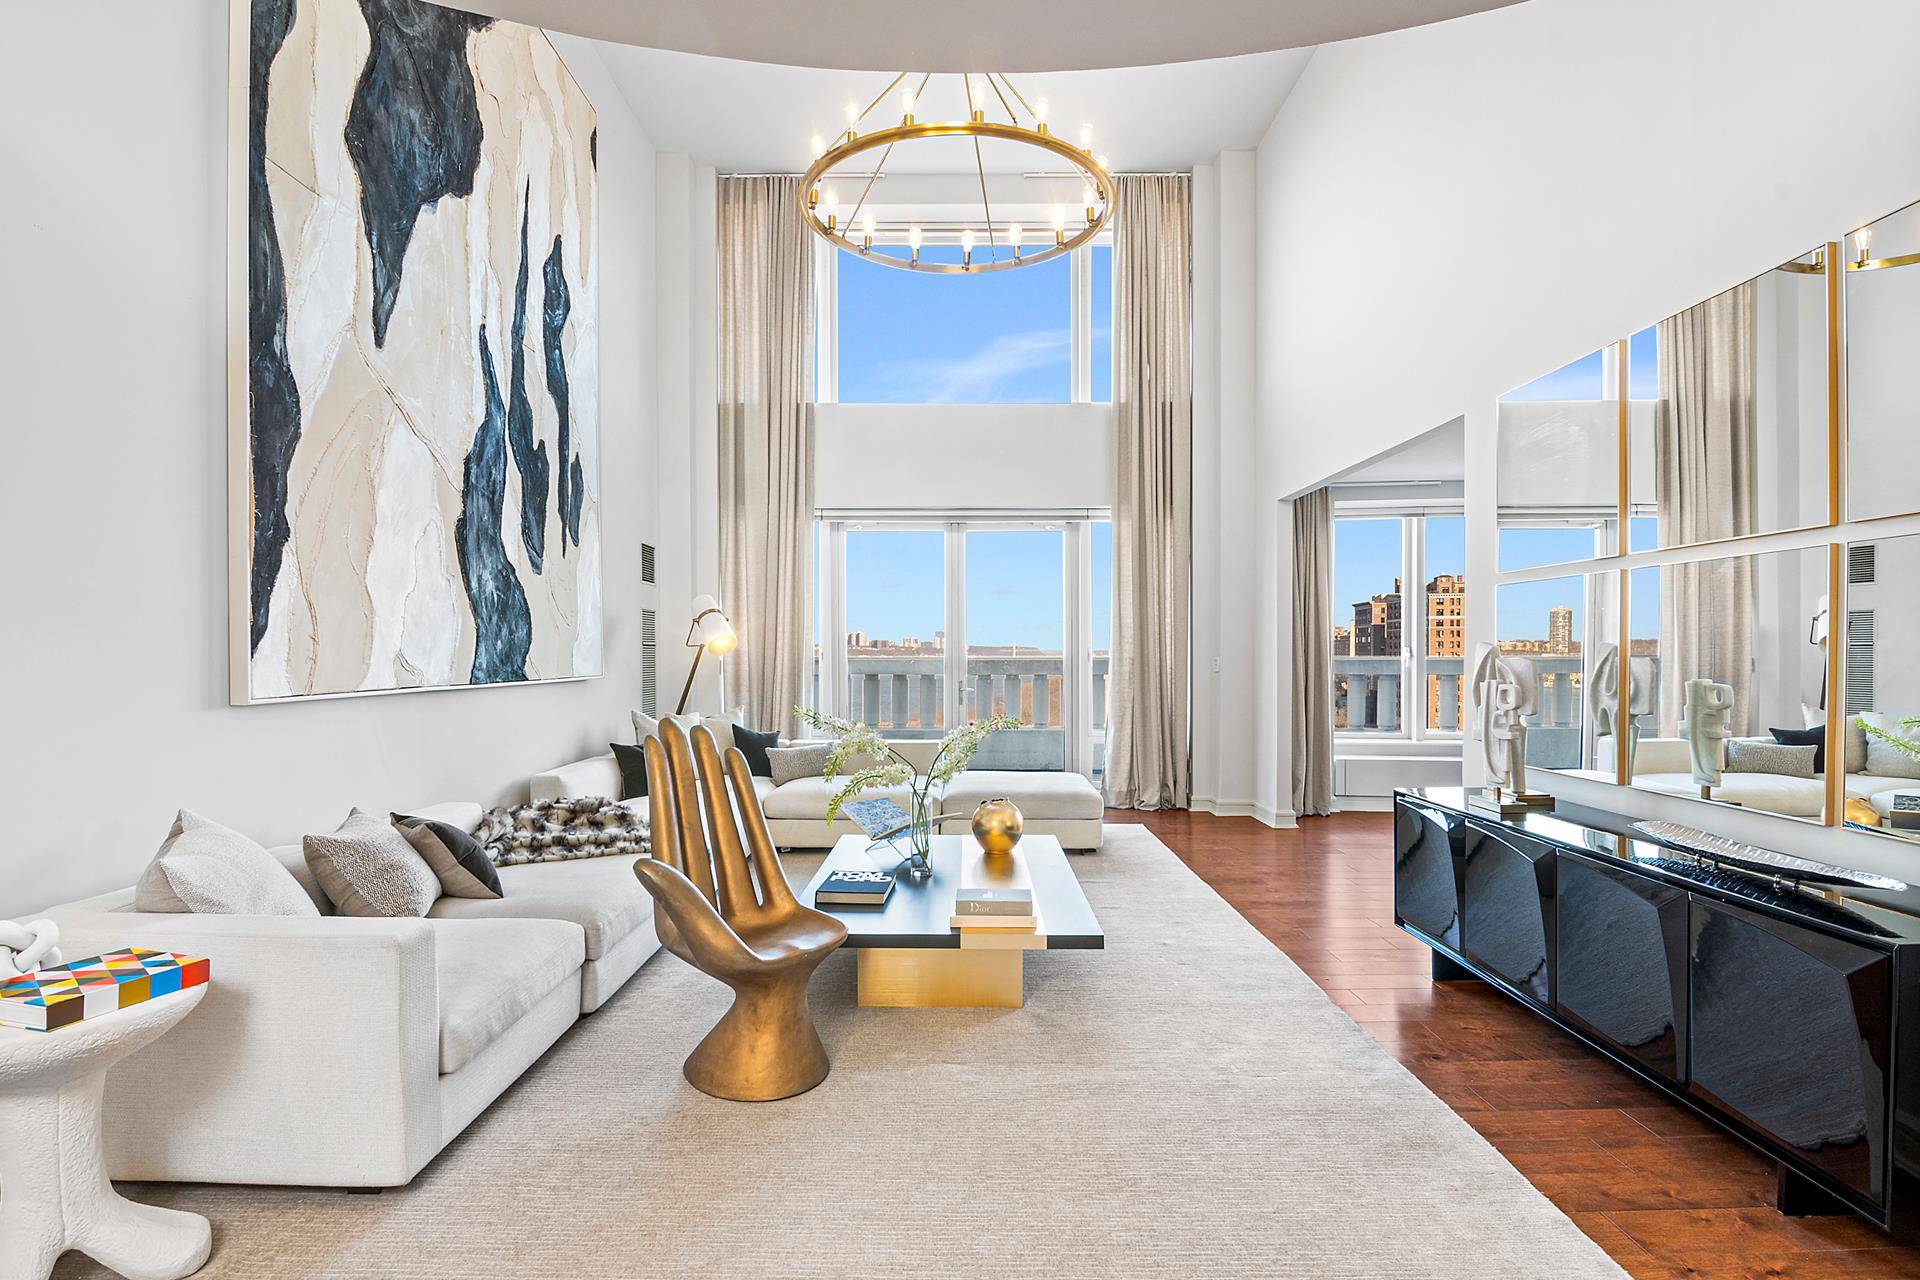 ROMANTIC VIEWS FOR MILES A Magnificent, elegant high floor home in one of the finest condominiums on The Upper West Side.